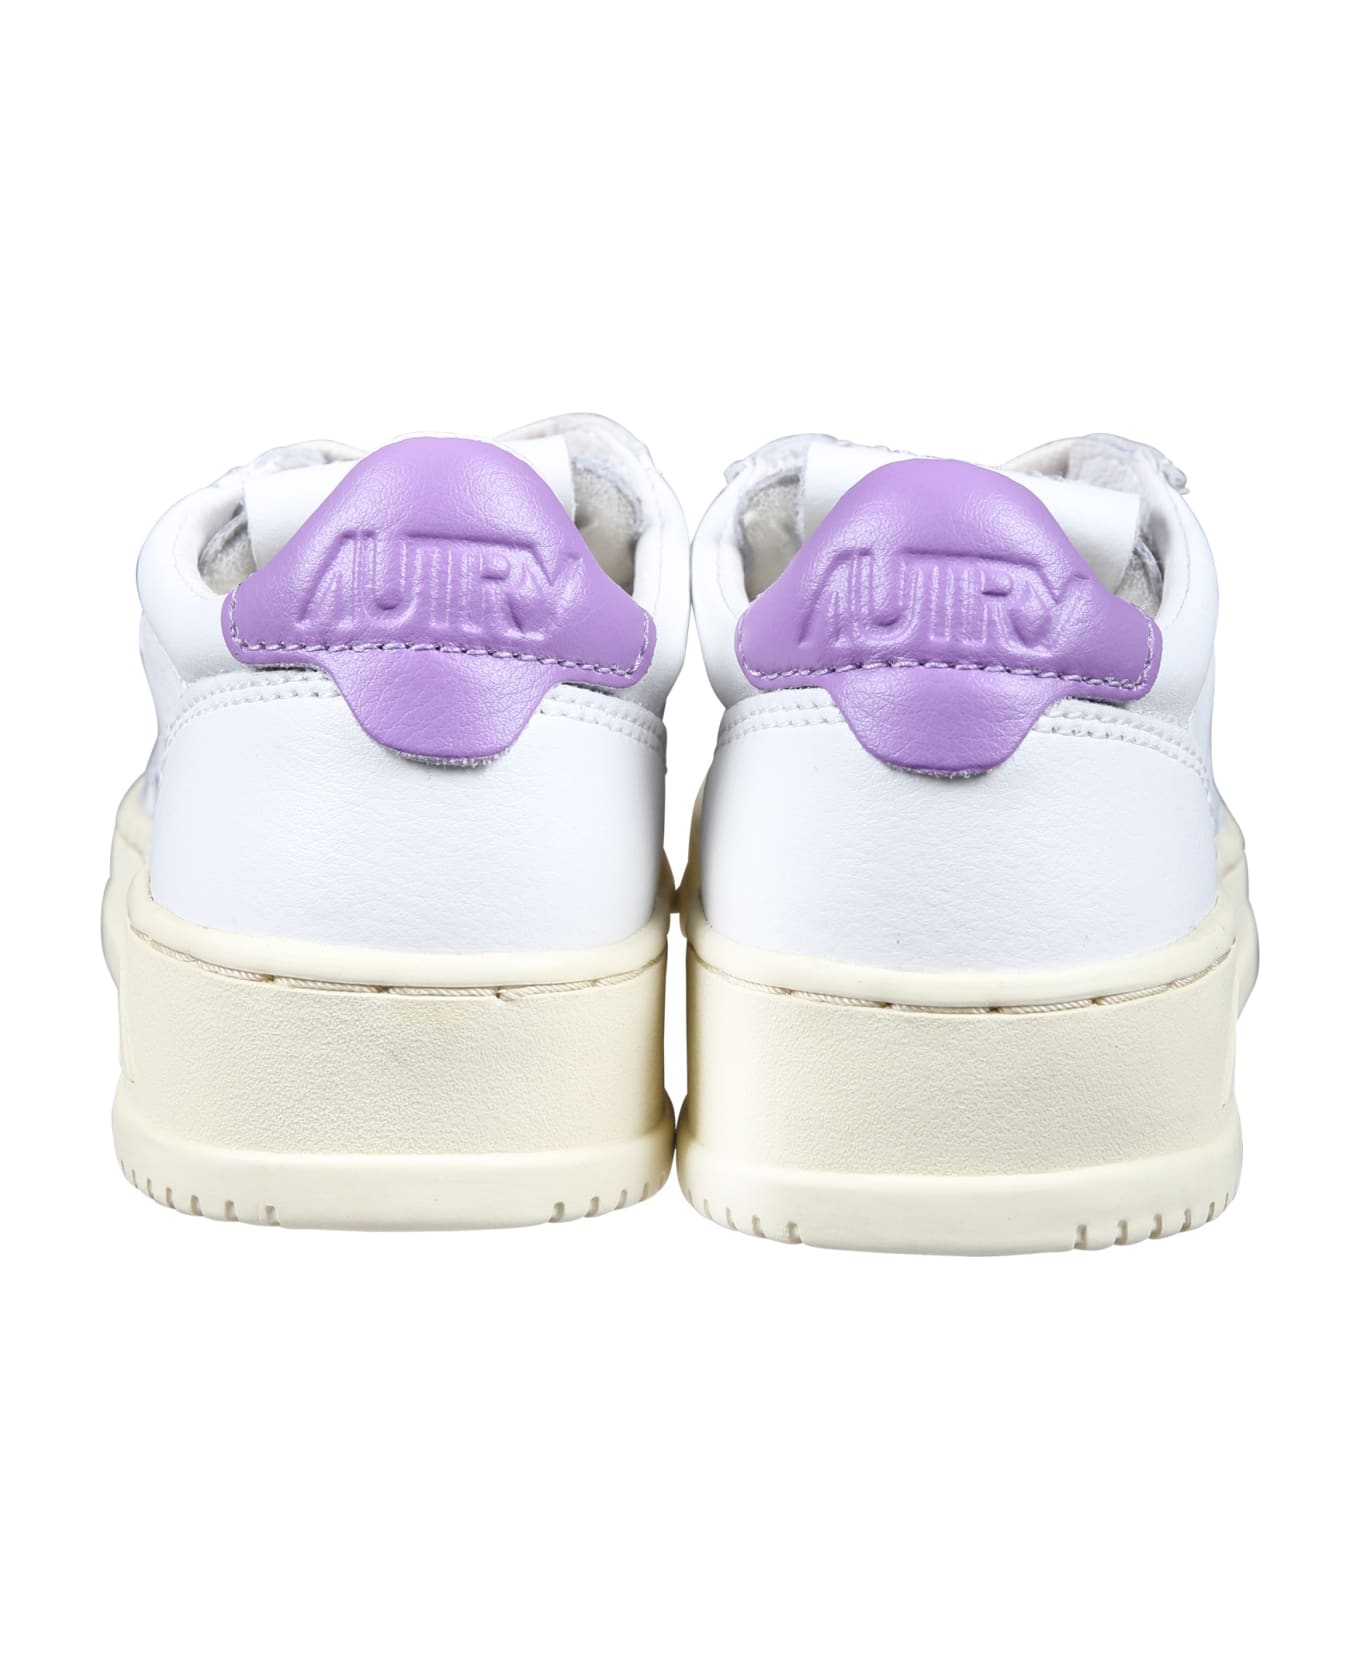 Autry Medalist Low Sneakers For Kids - LILAC シューズ